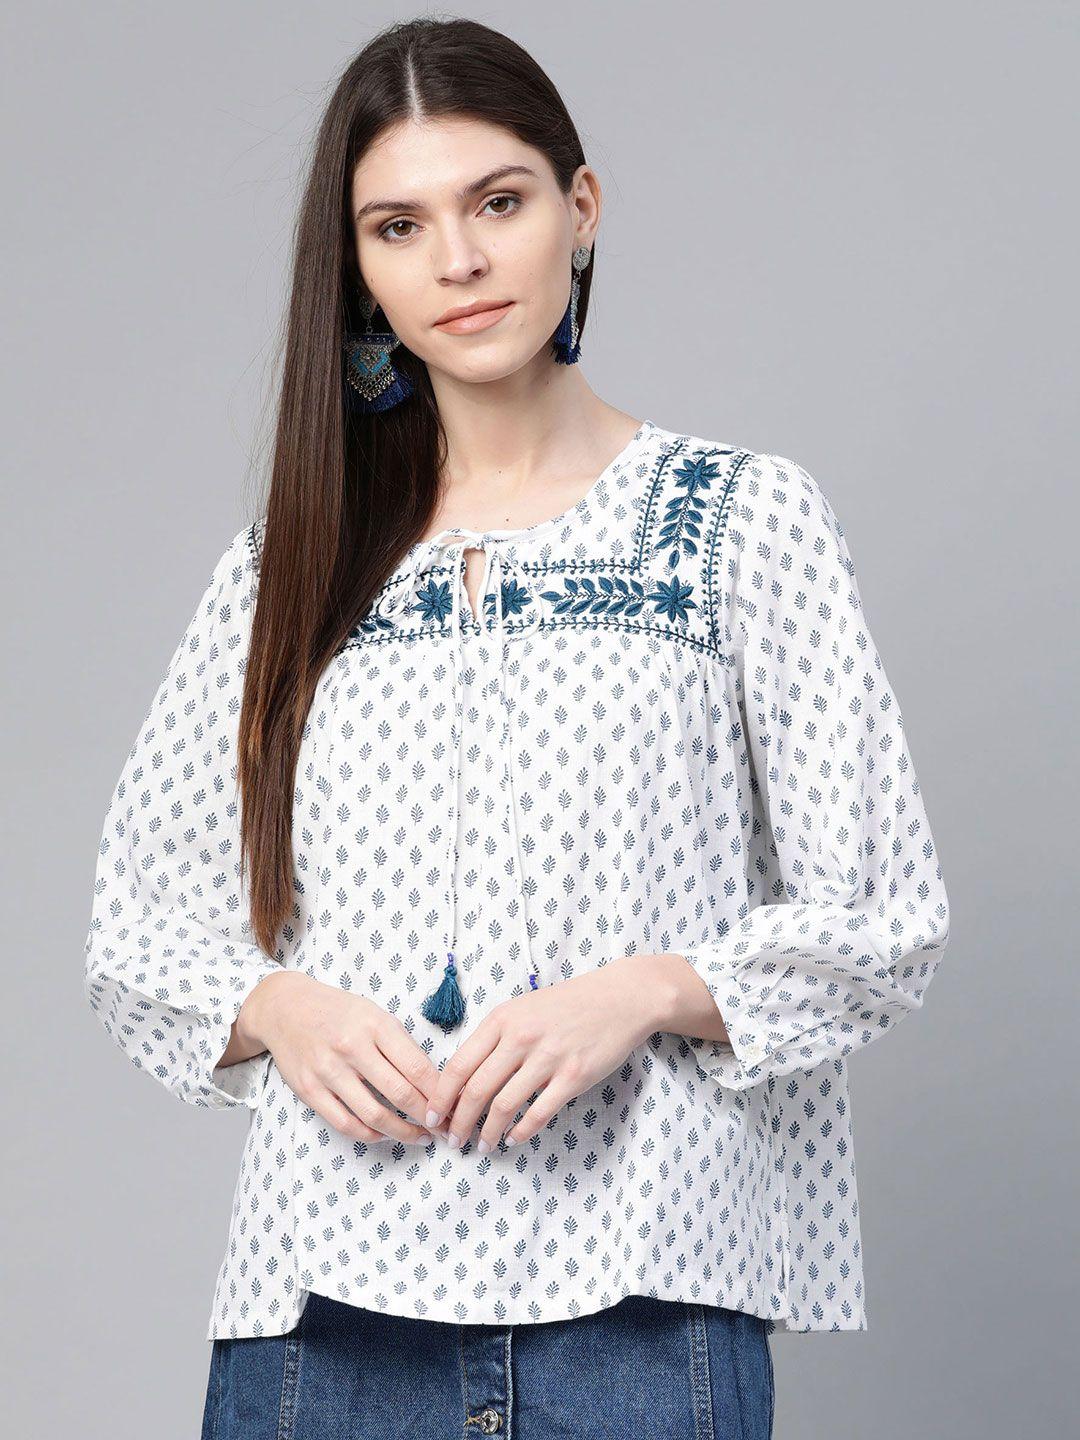 rangriti-women-white-&-teal-blue-embroidered-ethnic-printed-top